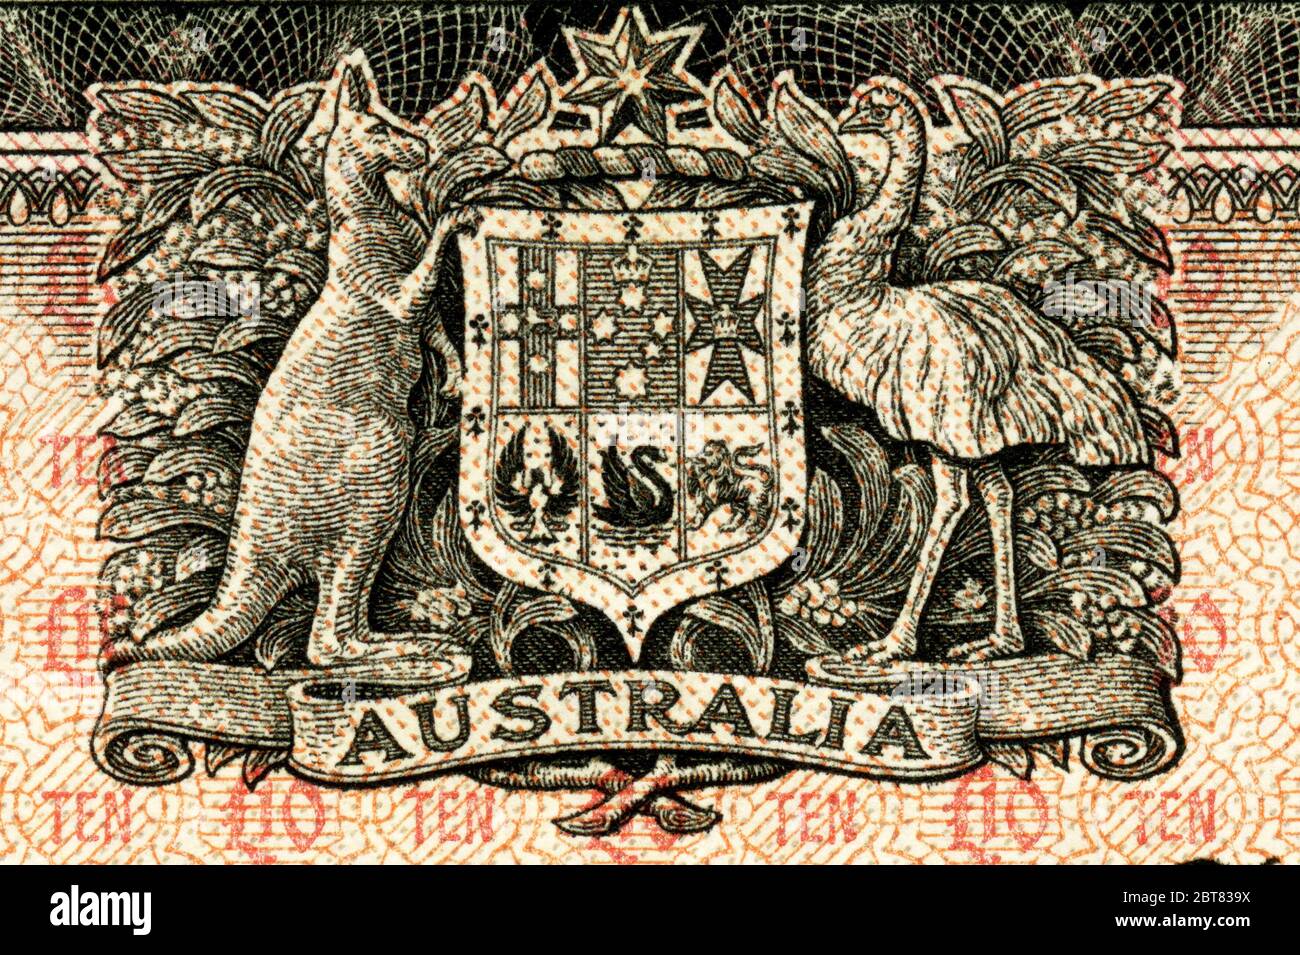 Australiancoat of arms featured on a 10 pound bank note issued between 1954 and 1959 Stock Photo